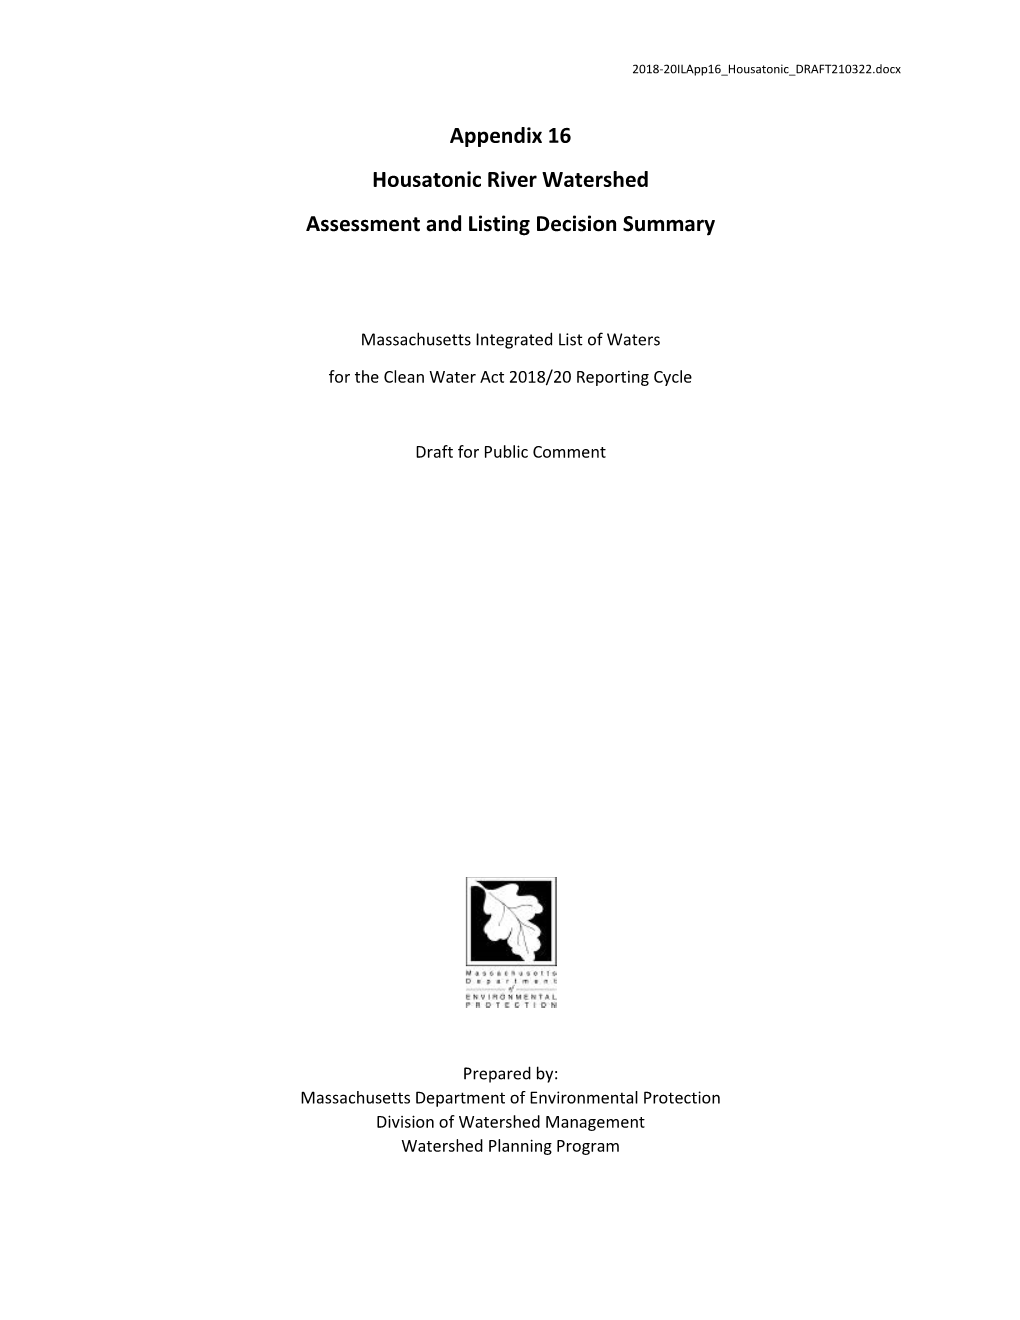 Appendix 16 Housatonic River Watershed Assessment and Listing Decision Summary